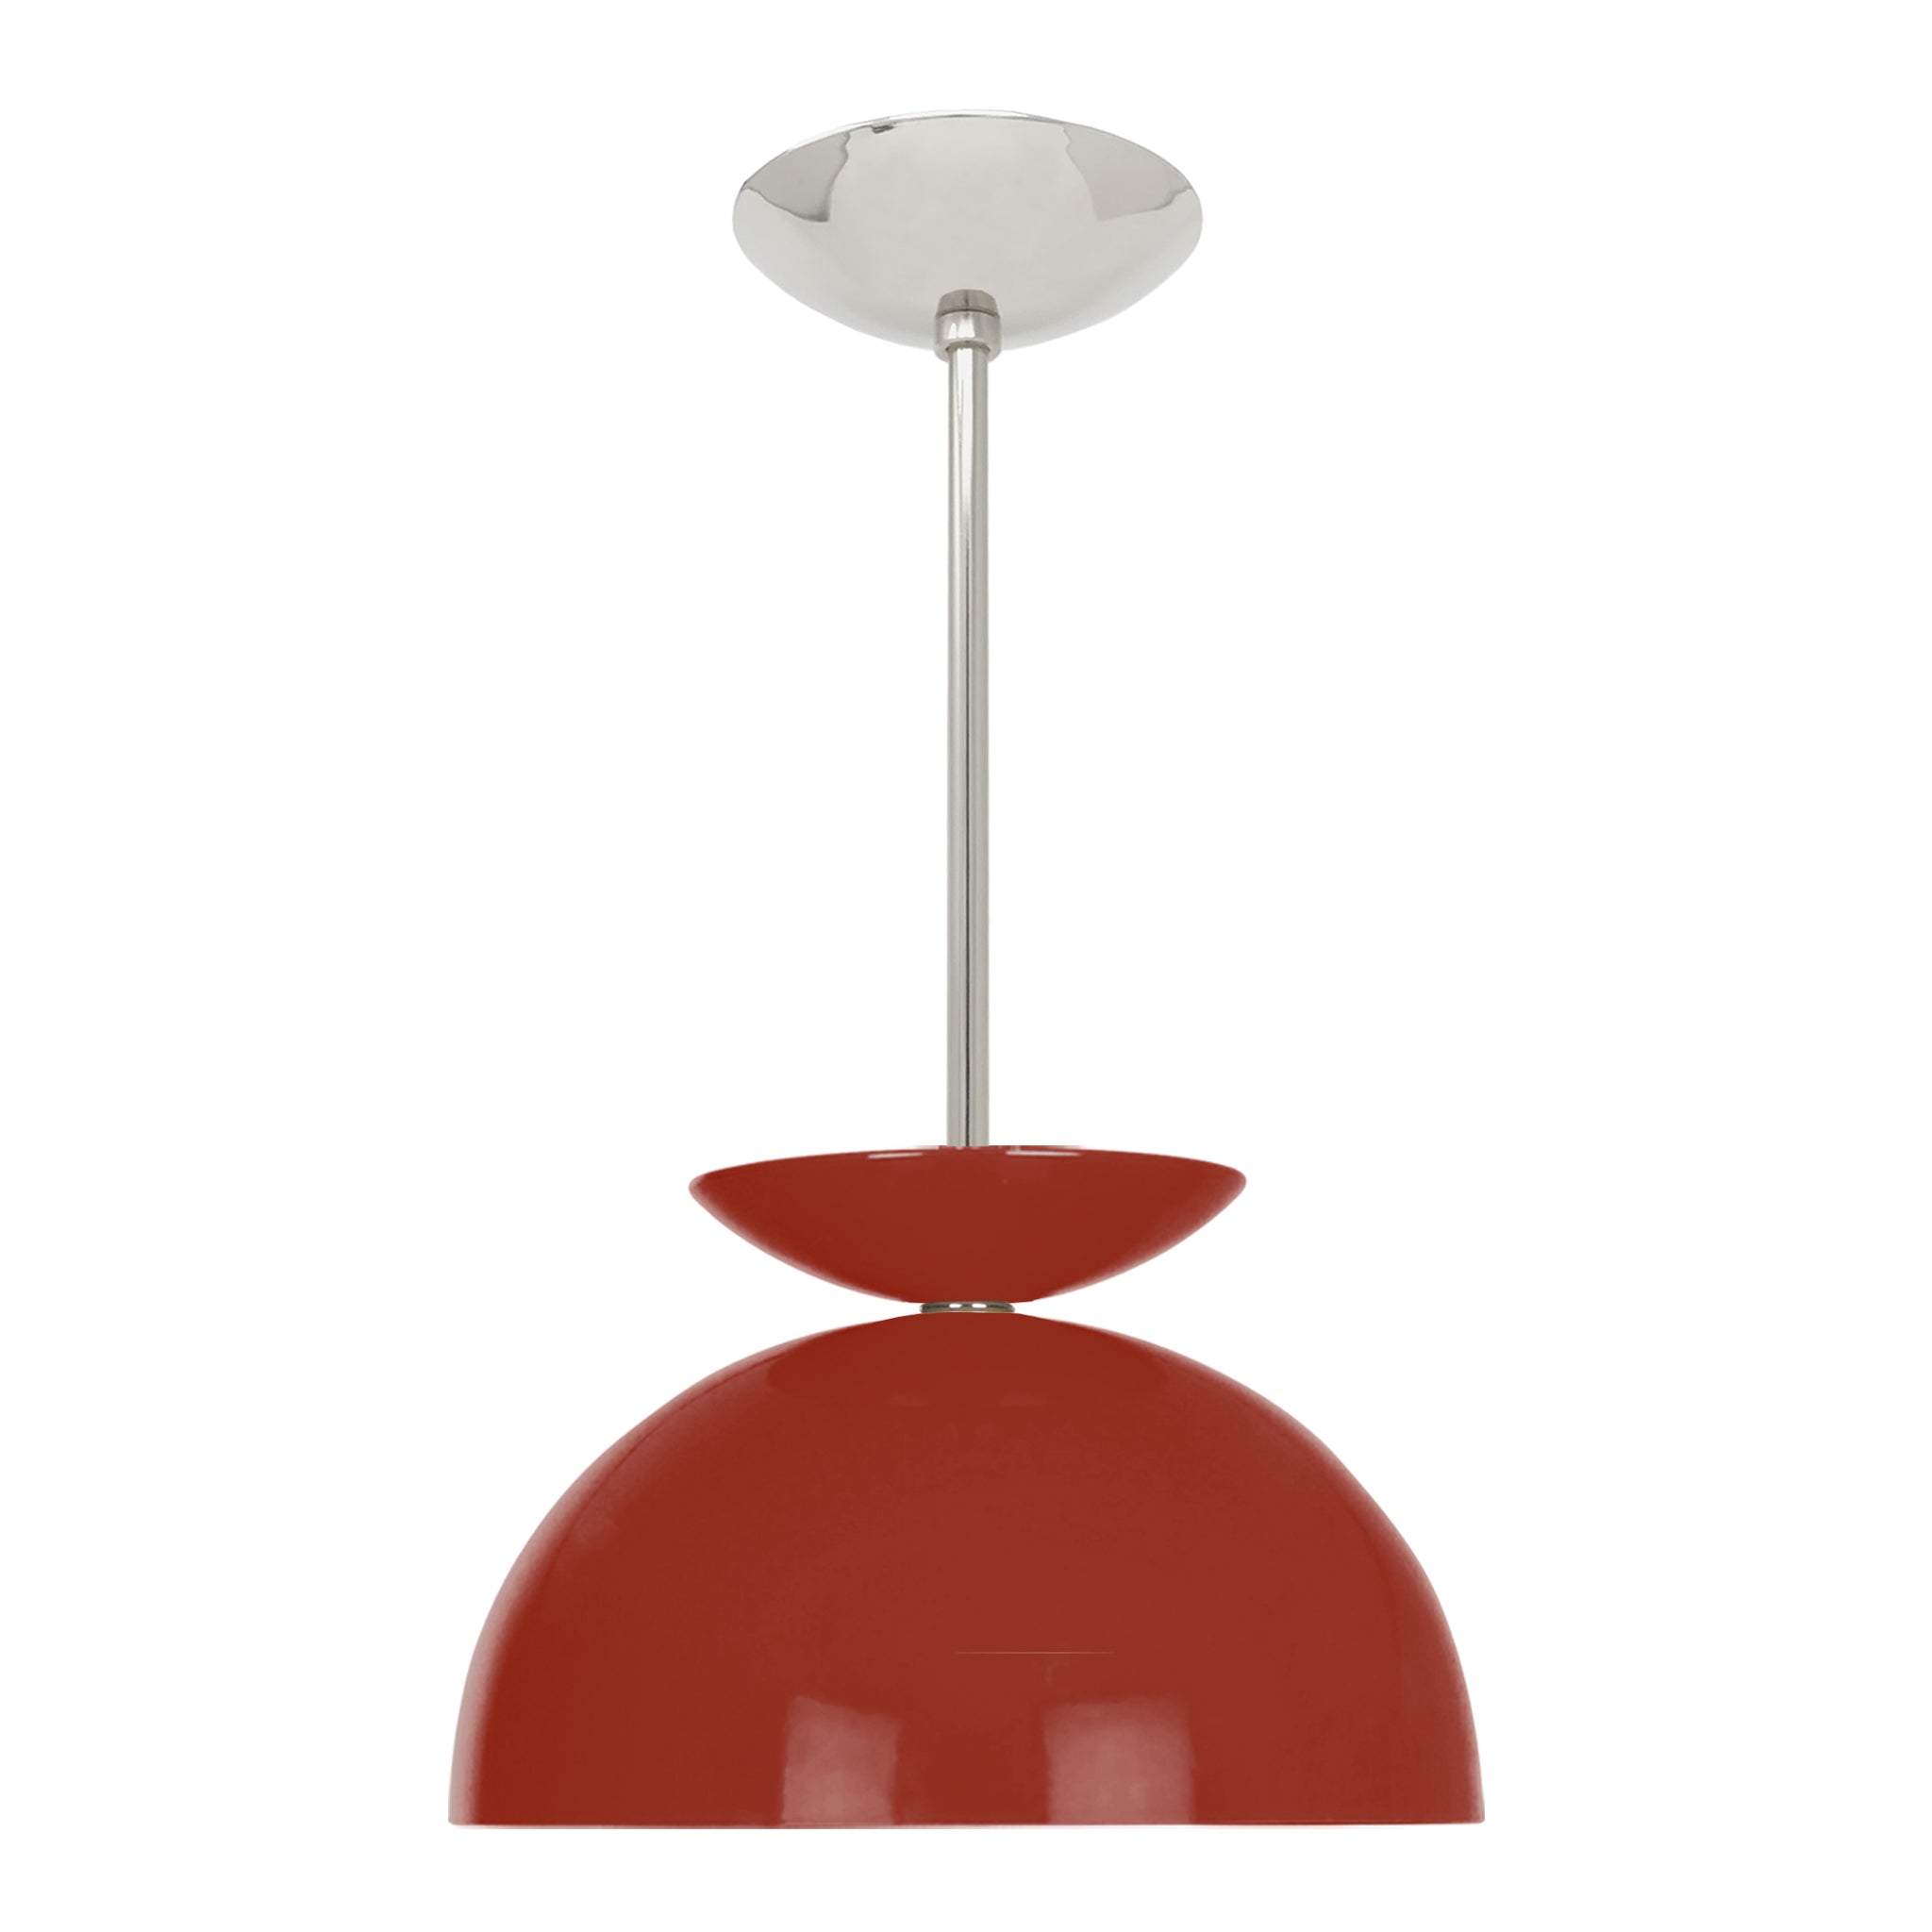 Nickel and riding hood red color Echo pendant 12" Dutton Brown lighting